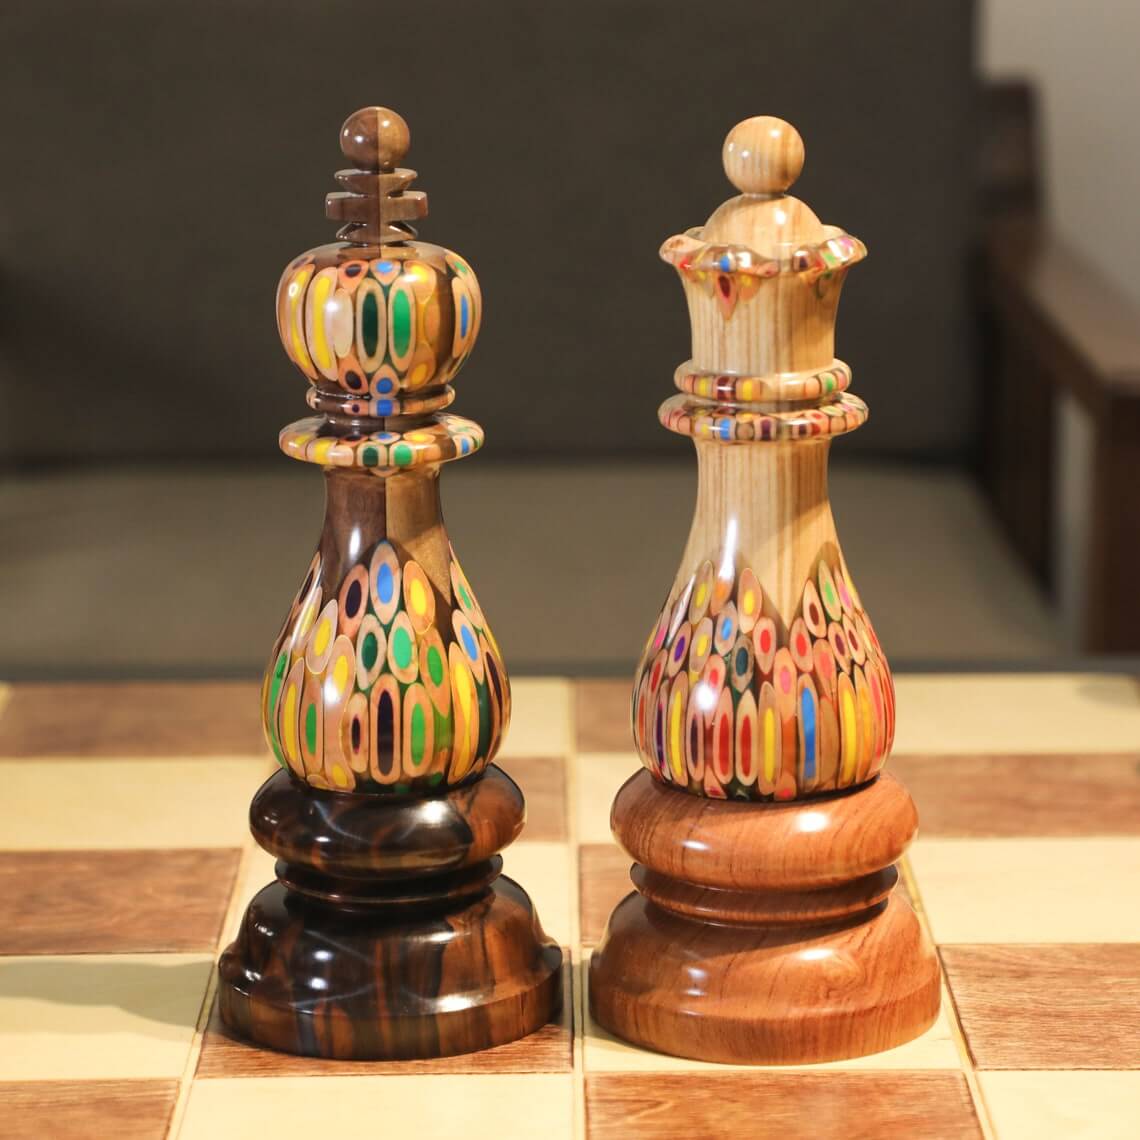 Giant Ornamental King and Queen- Chess Pieces Decor - Deluxe Serial (4)